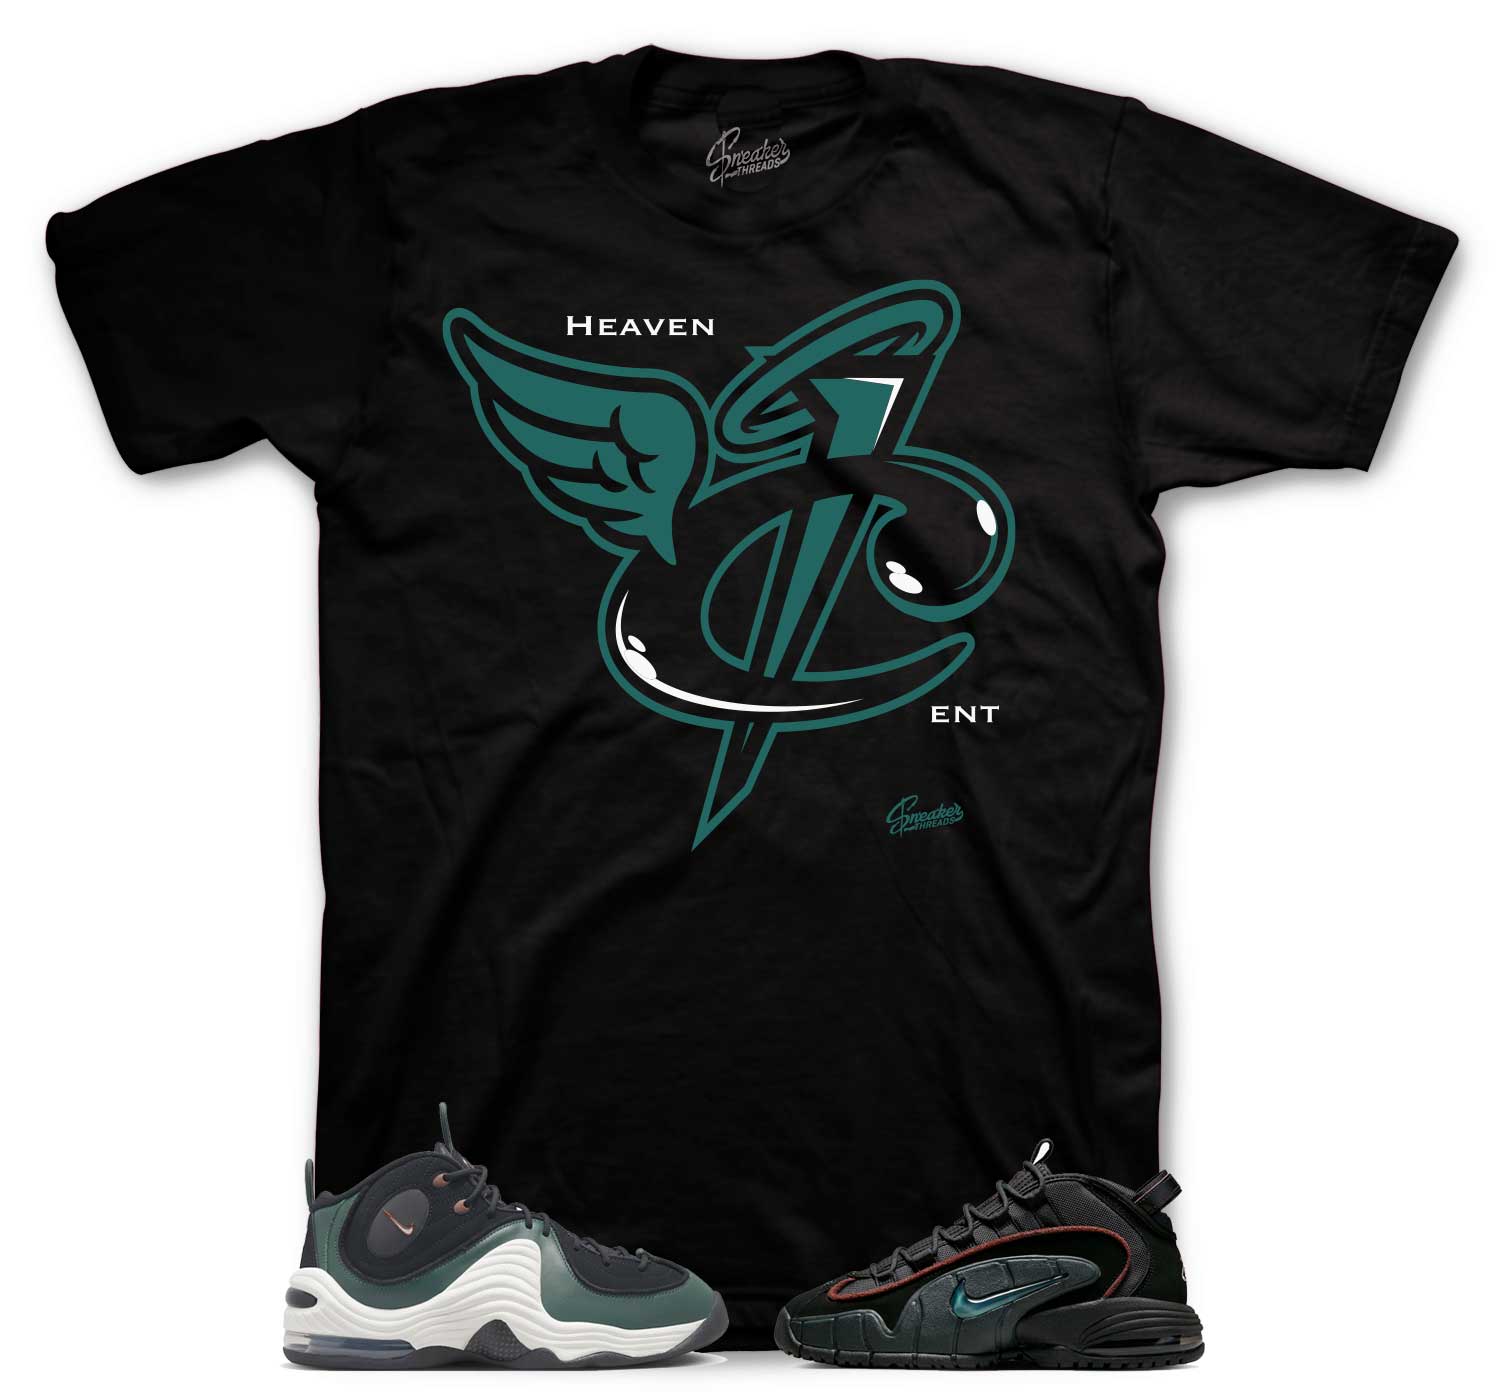 Air Max Penny Faded Spruce Shirt - Heaven Cent - Black